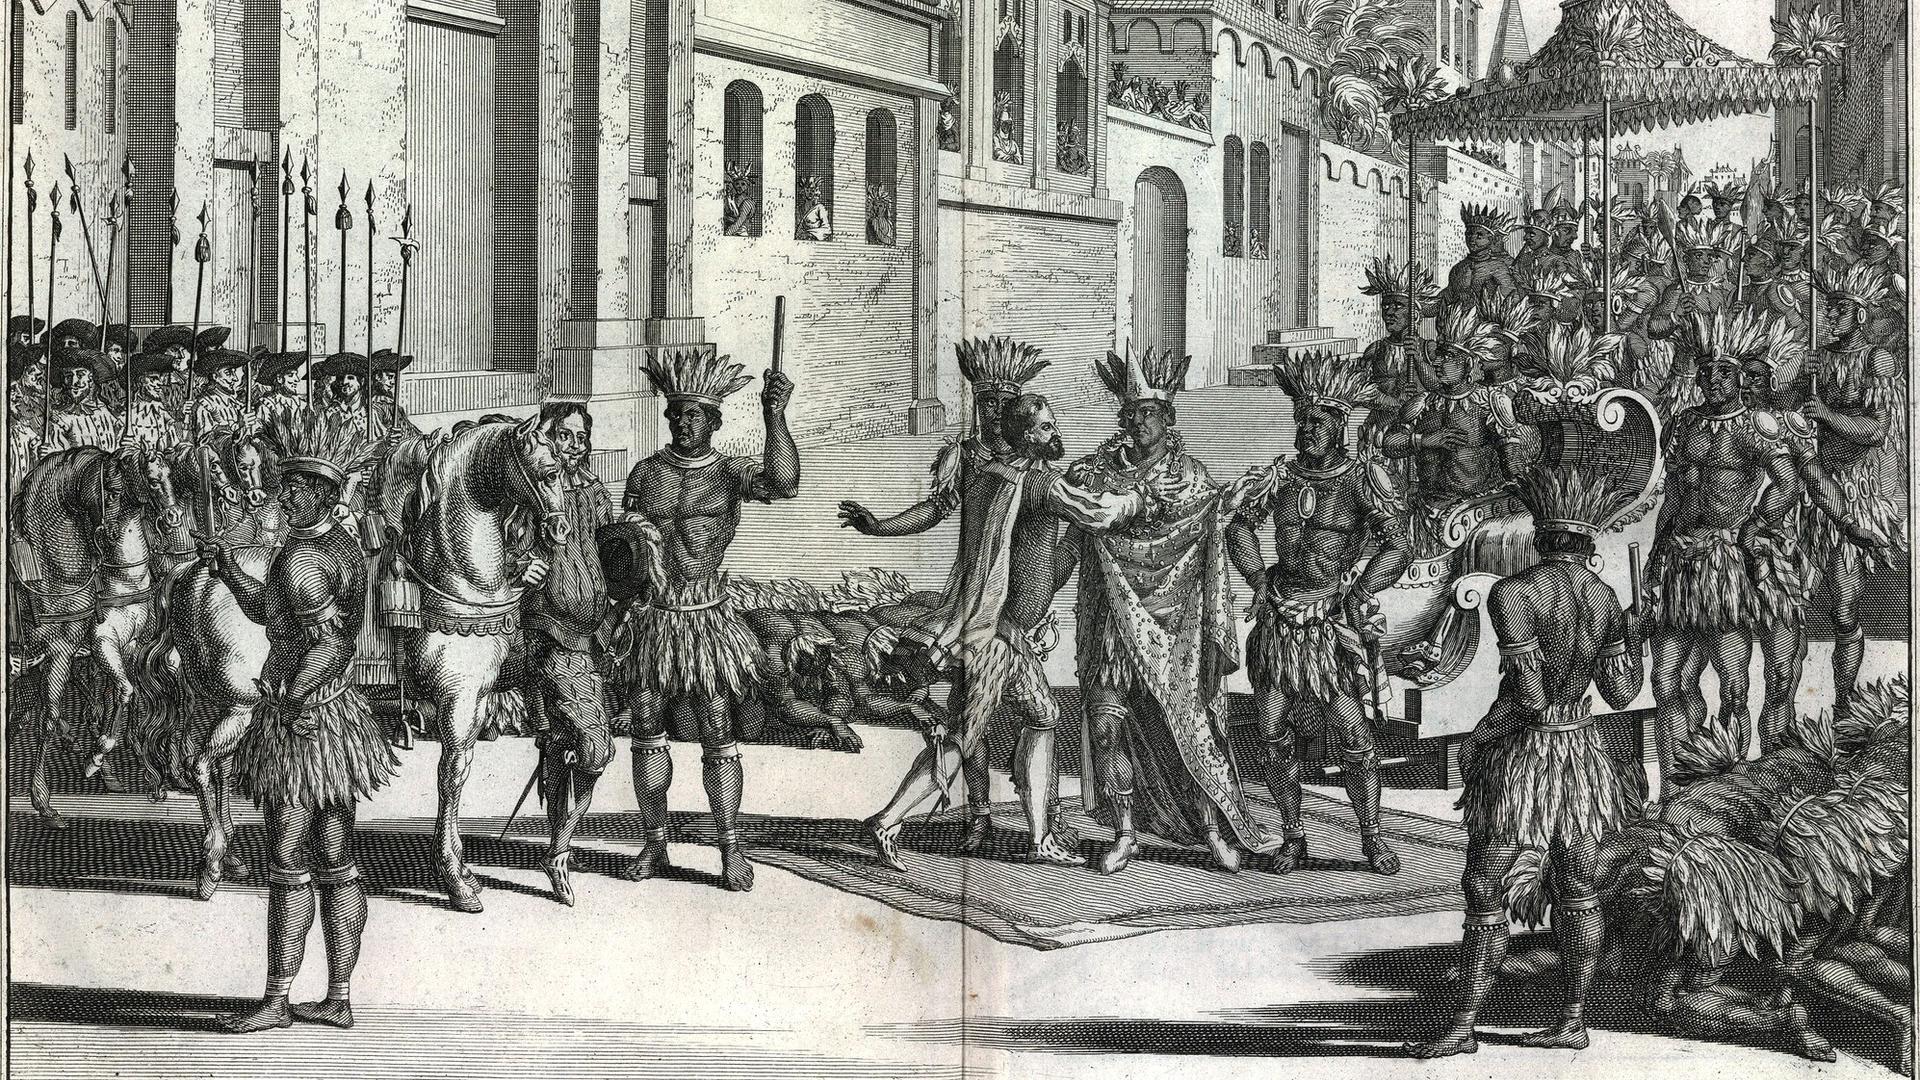 An illustration from an 18th century history of the conquest of Mexico by the Spaniards.